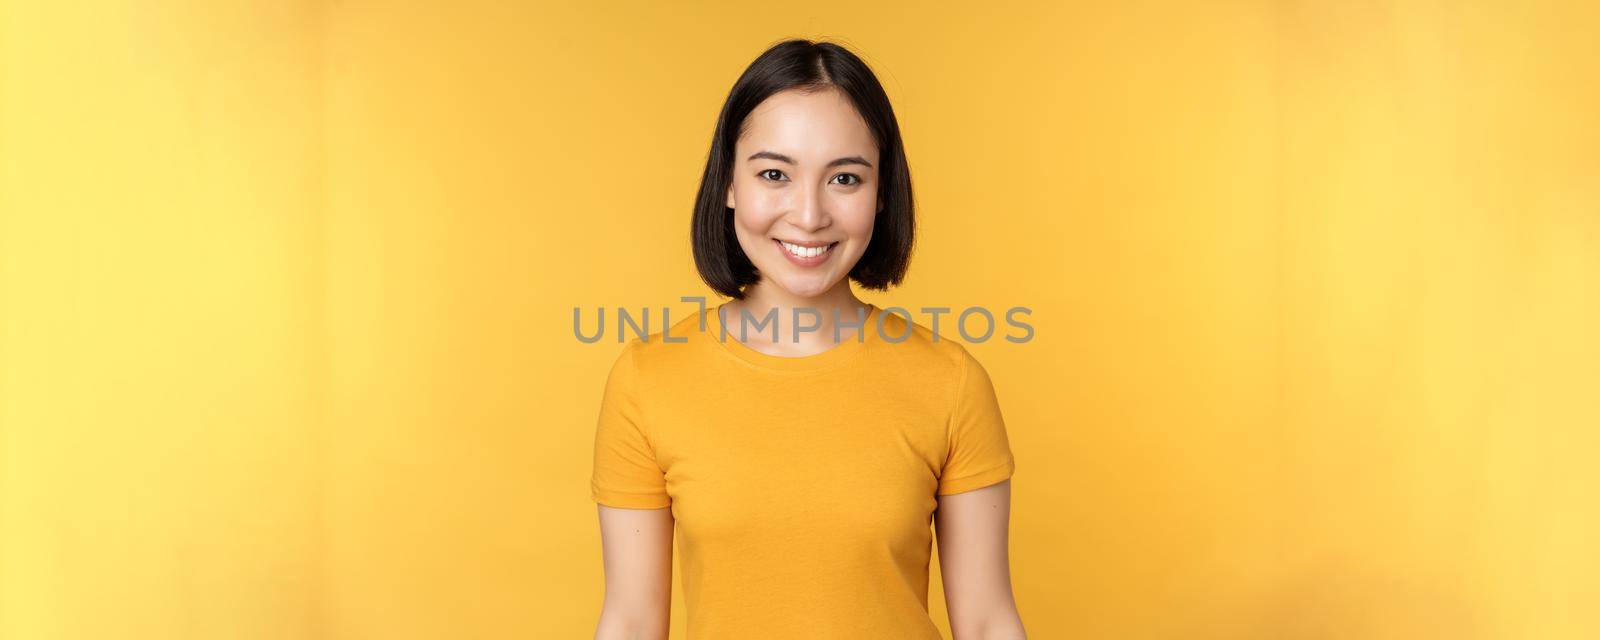 Portrait of young modern asian woman, smiling happy with white teeth, looking confident at camera, wearing casual t-shirt, standing over yellow background.